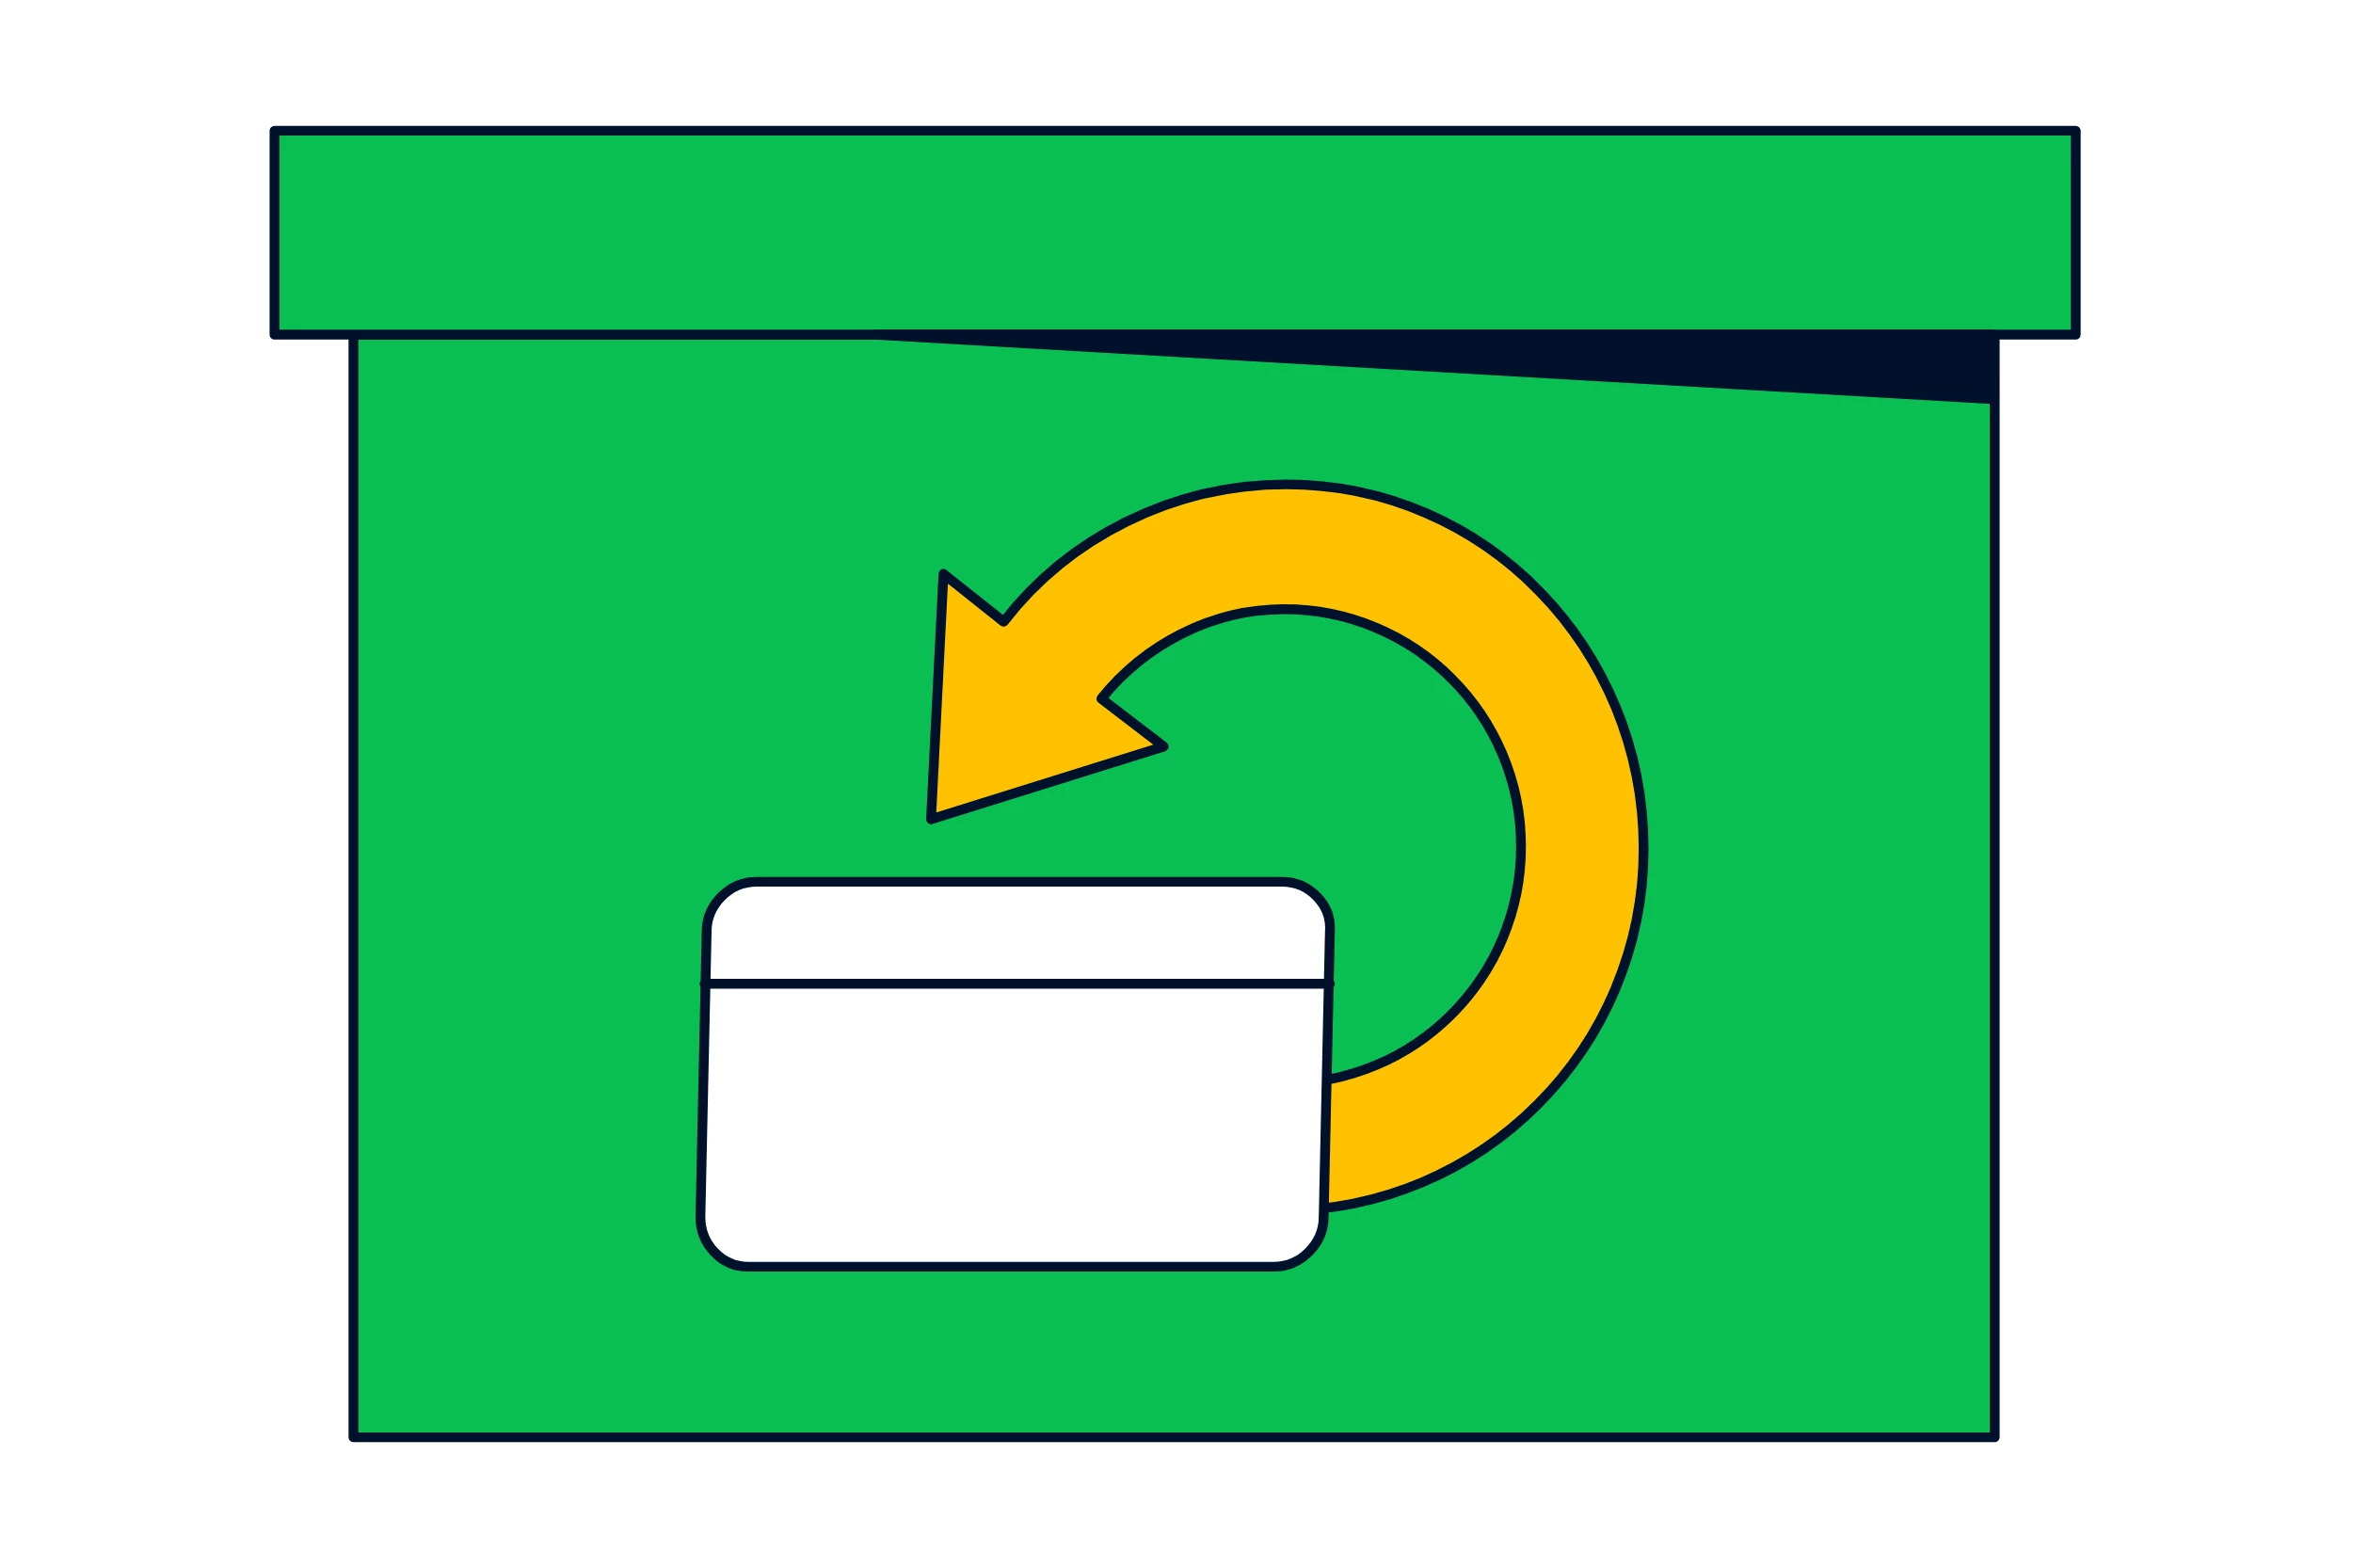 A green box with an illustration of a credit card and an arrow in circle, symbolising the return of goods.